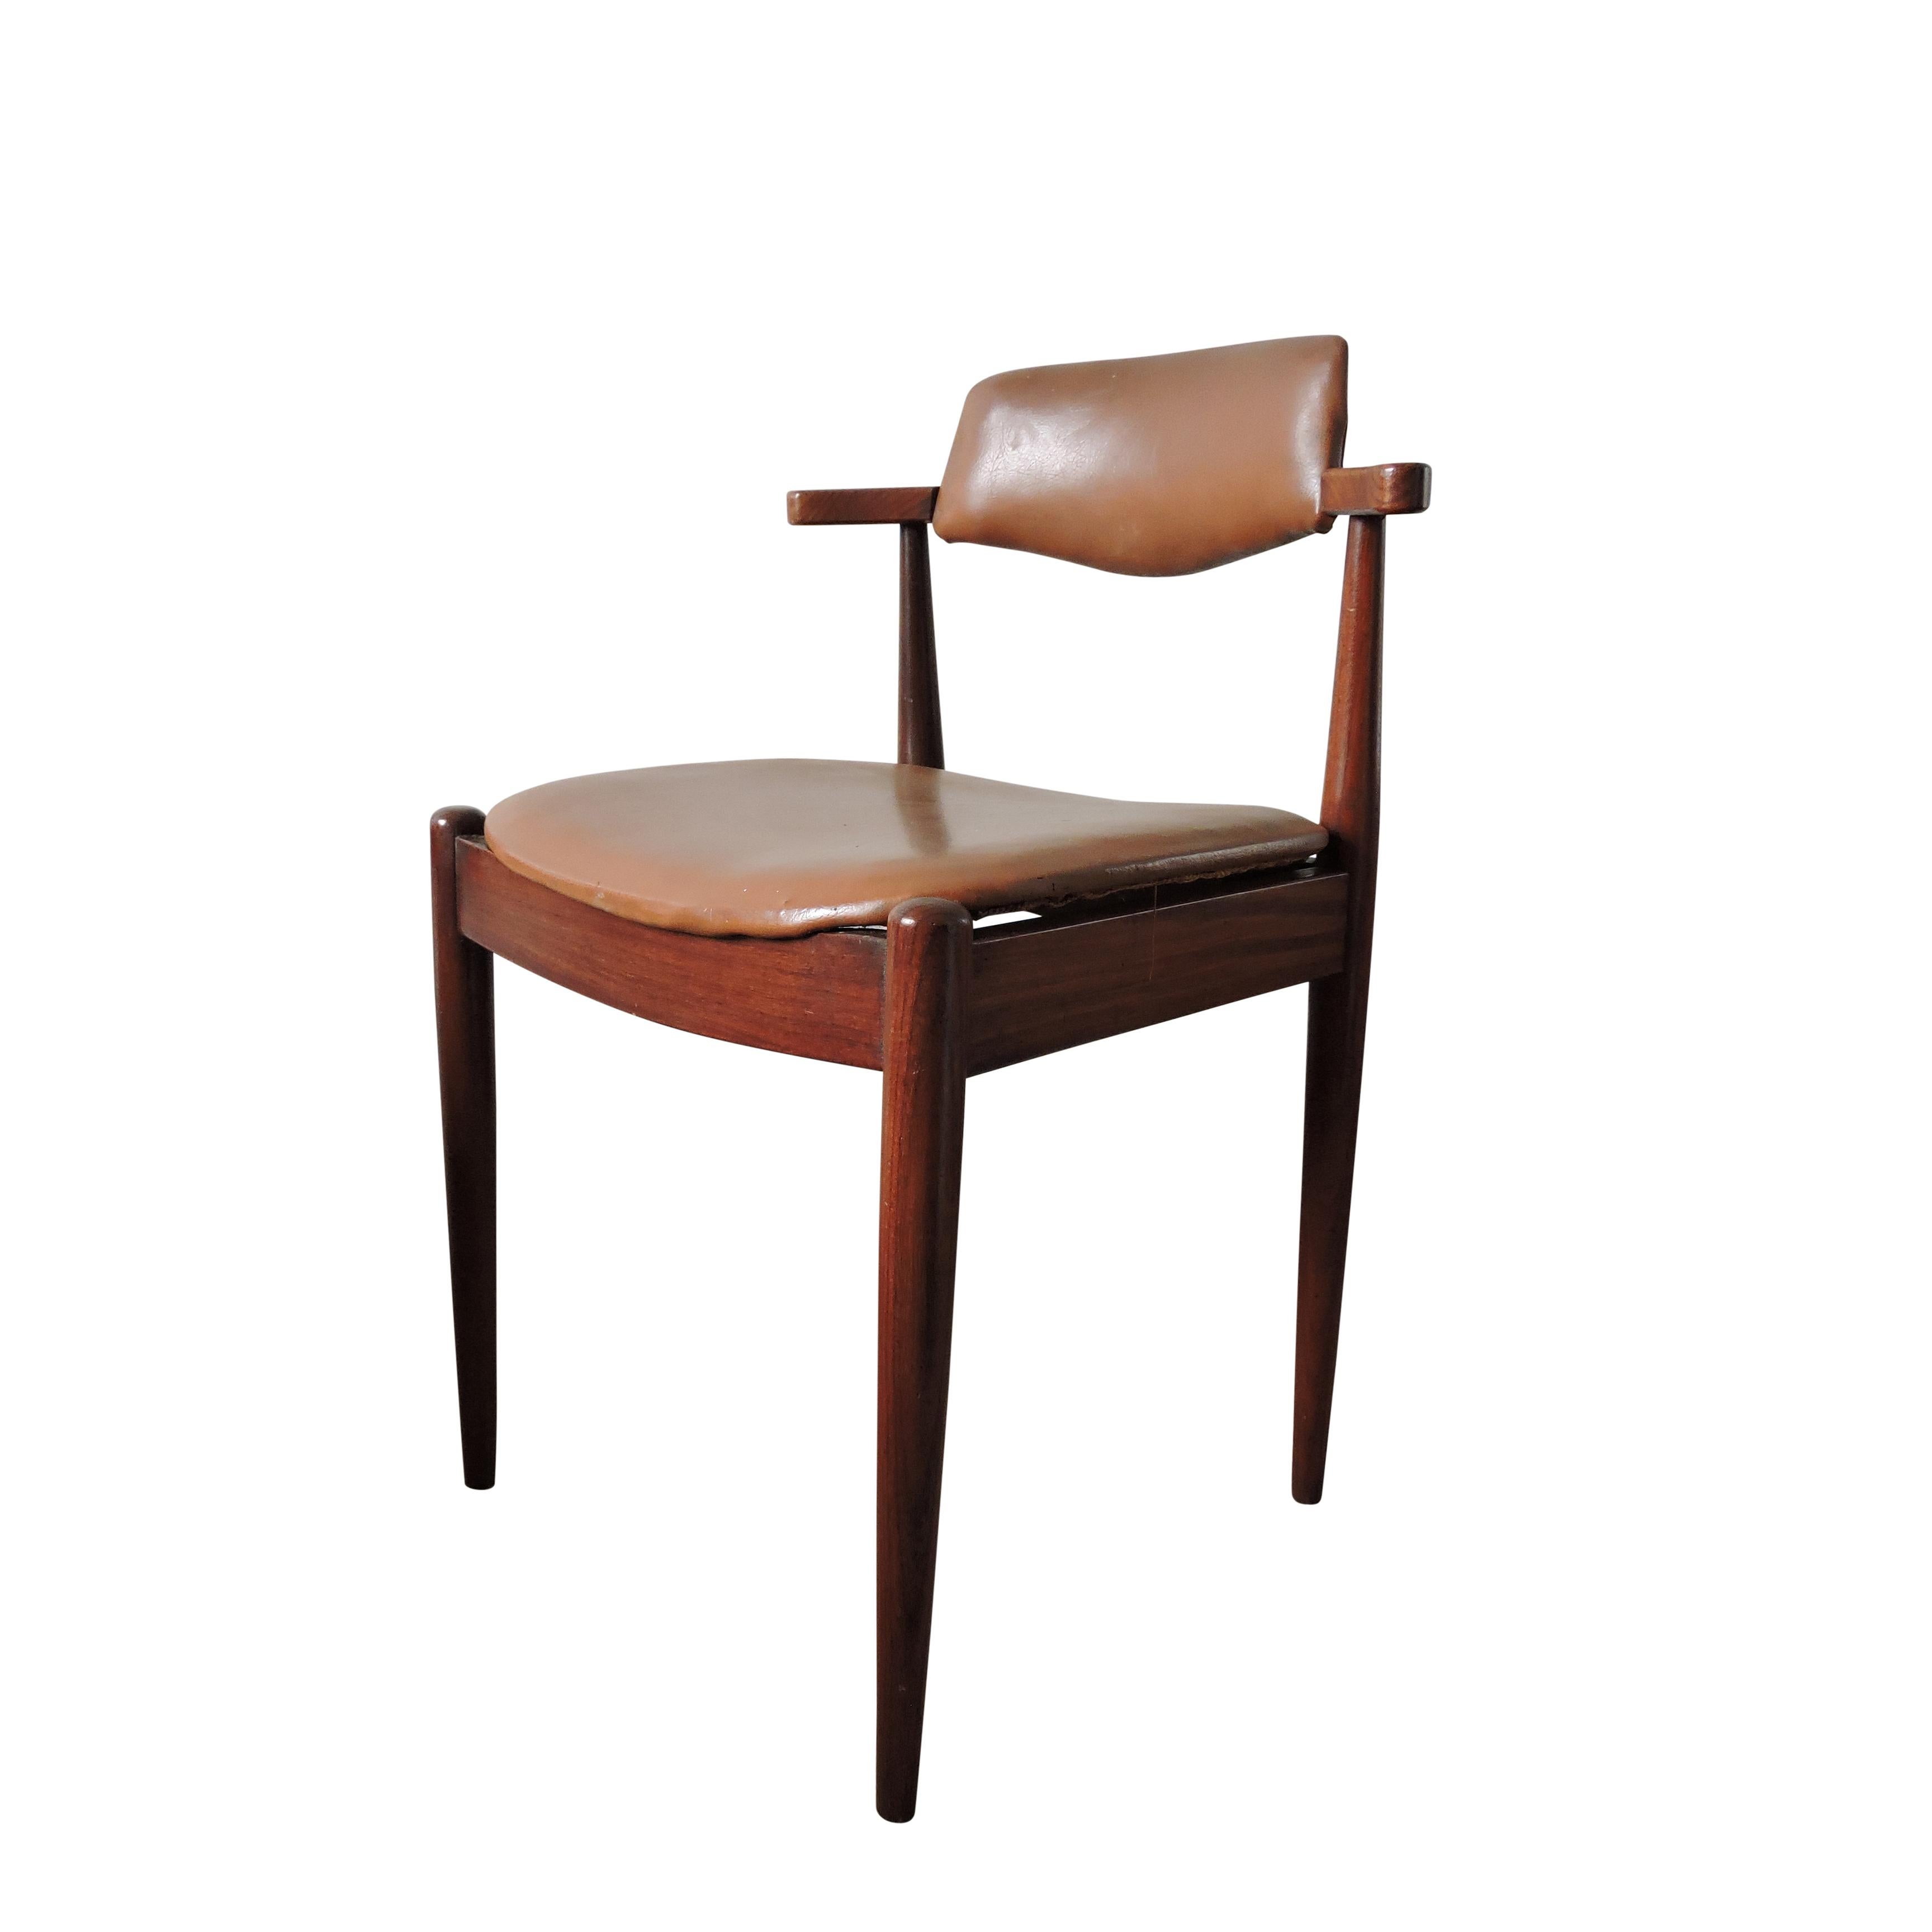 Set of 3 dark teak and faux leather brown dining chairs. The chairs feature tapered legs and short arms.